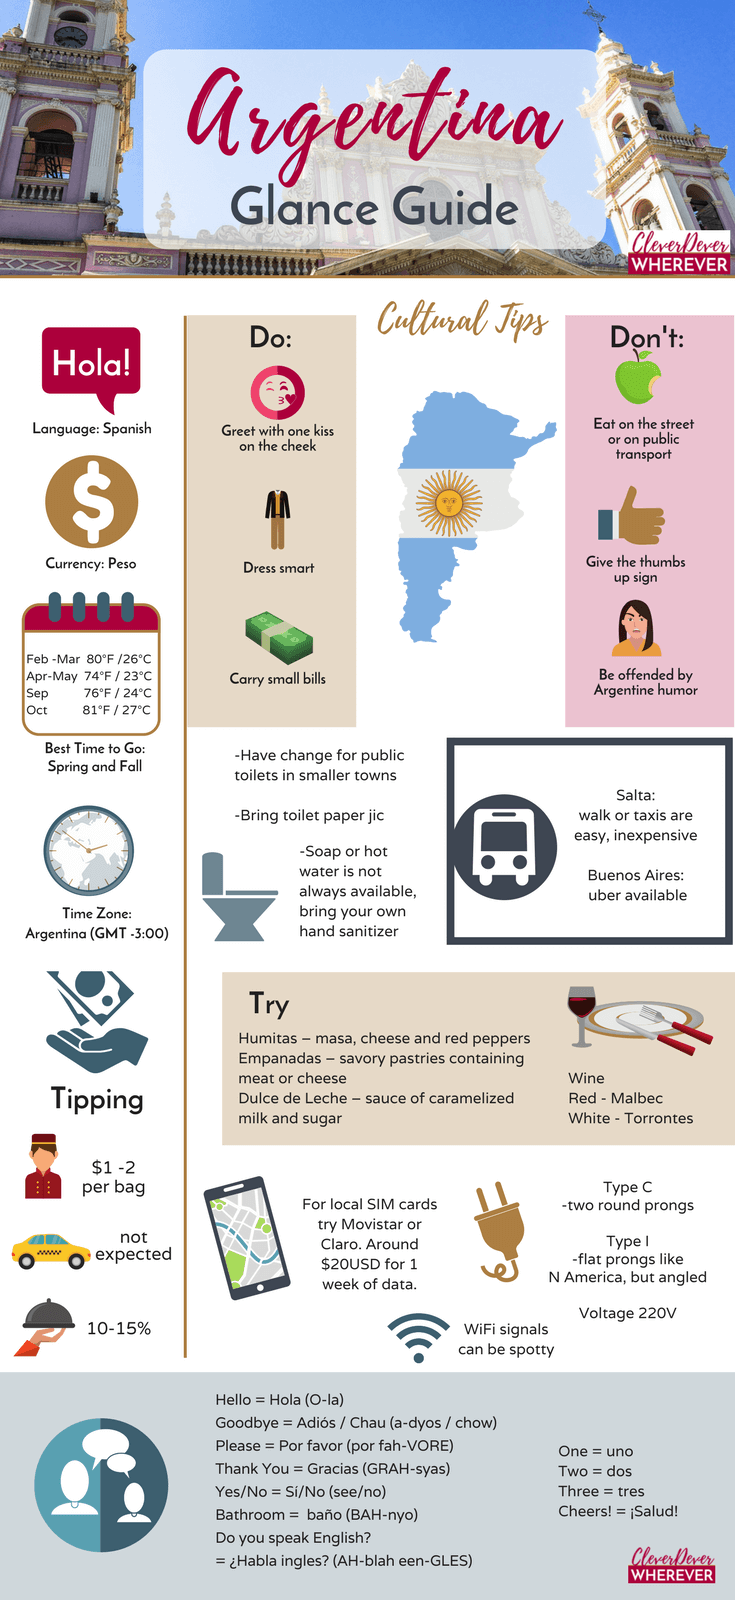 Argentina travel tips at a glance: Click here for all the details on what you need to know before you go to Argentina! #traveltips #Argentina #infographic